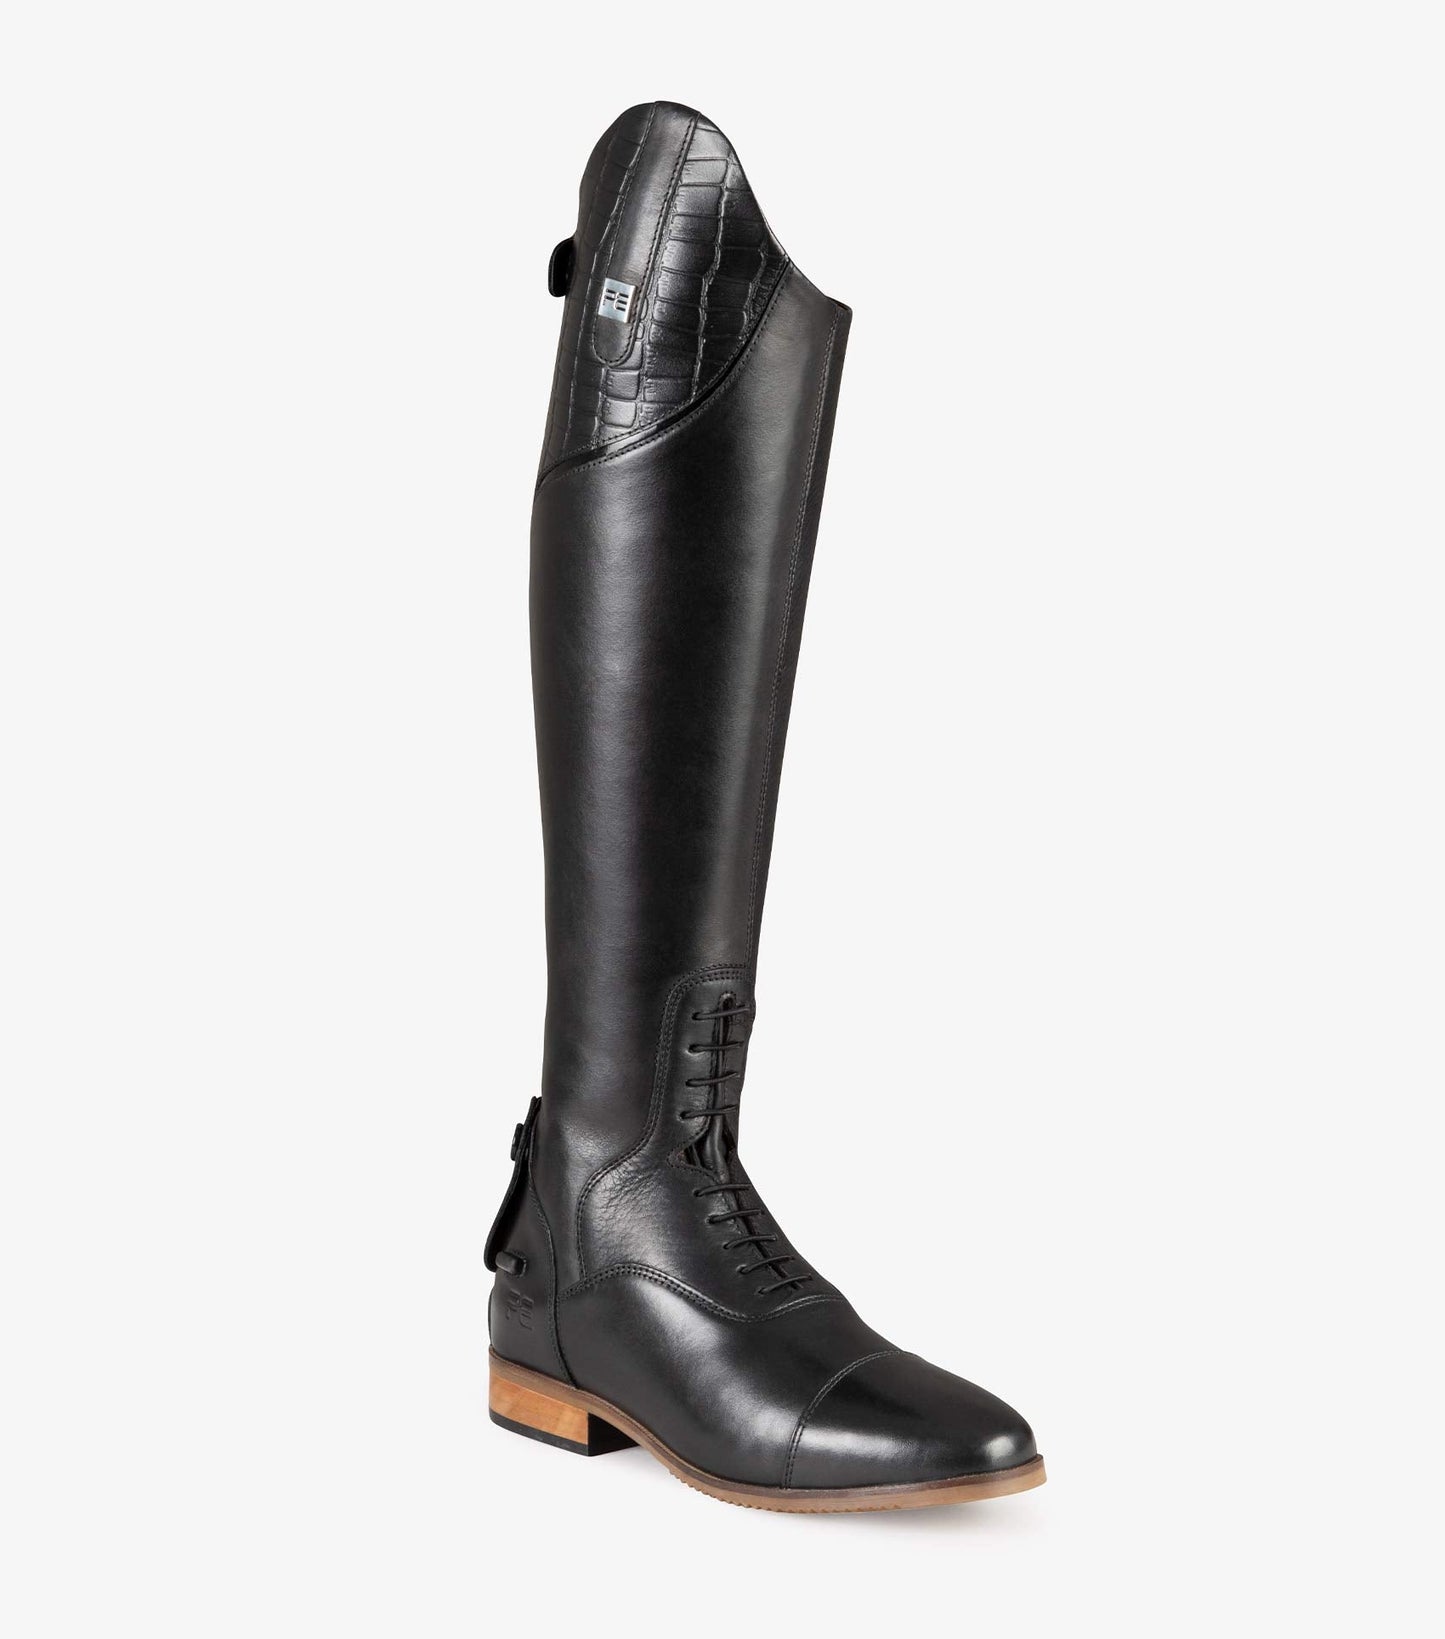 Premier Equine Passaggio Ladies Leather Field Tall Riding Boot - Black